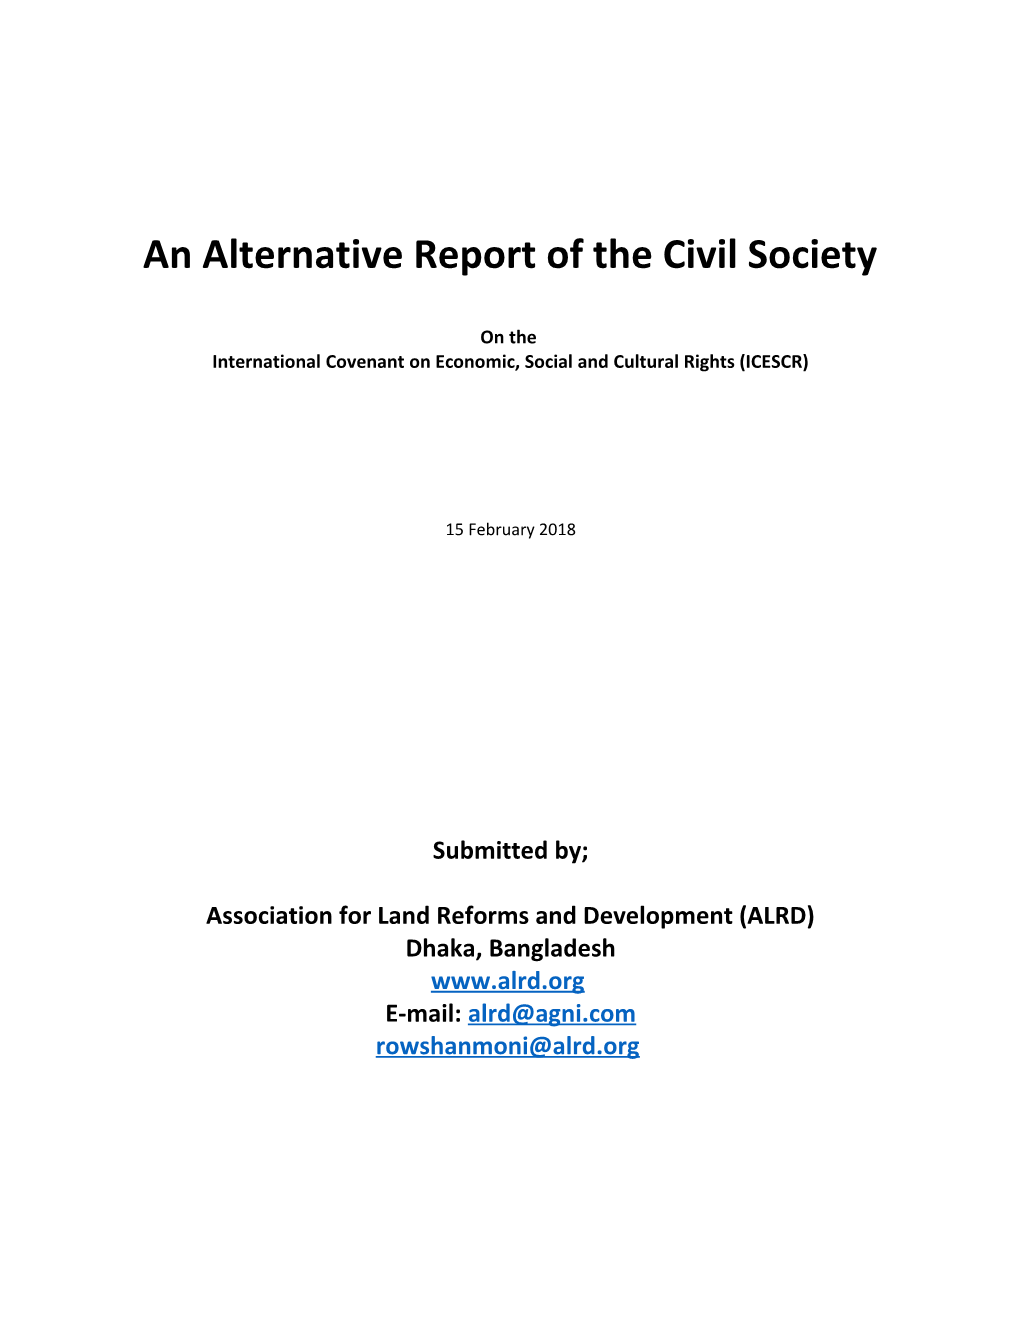 An Alternative Report of the Civil Society